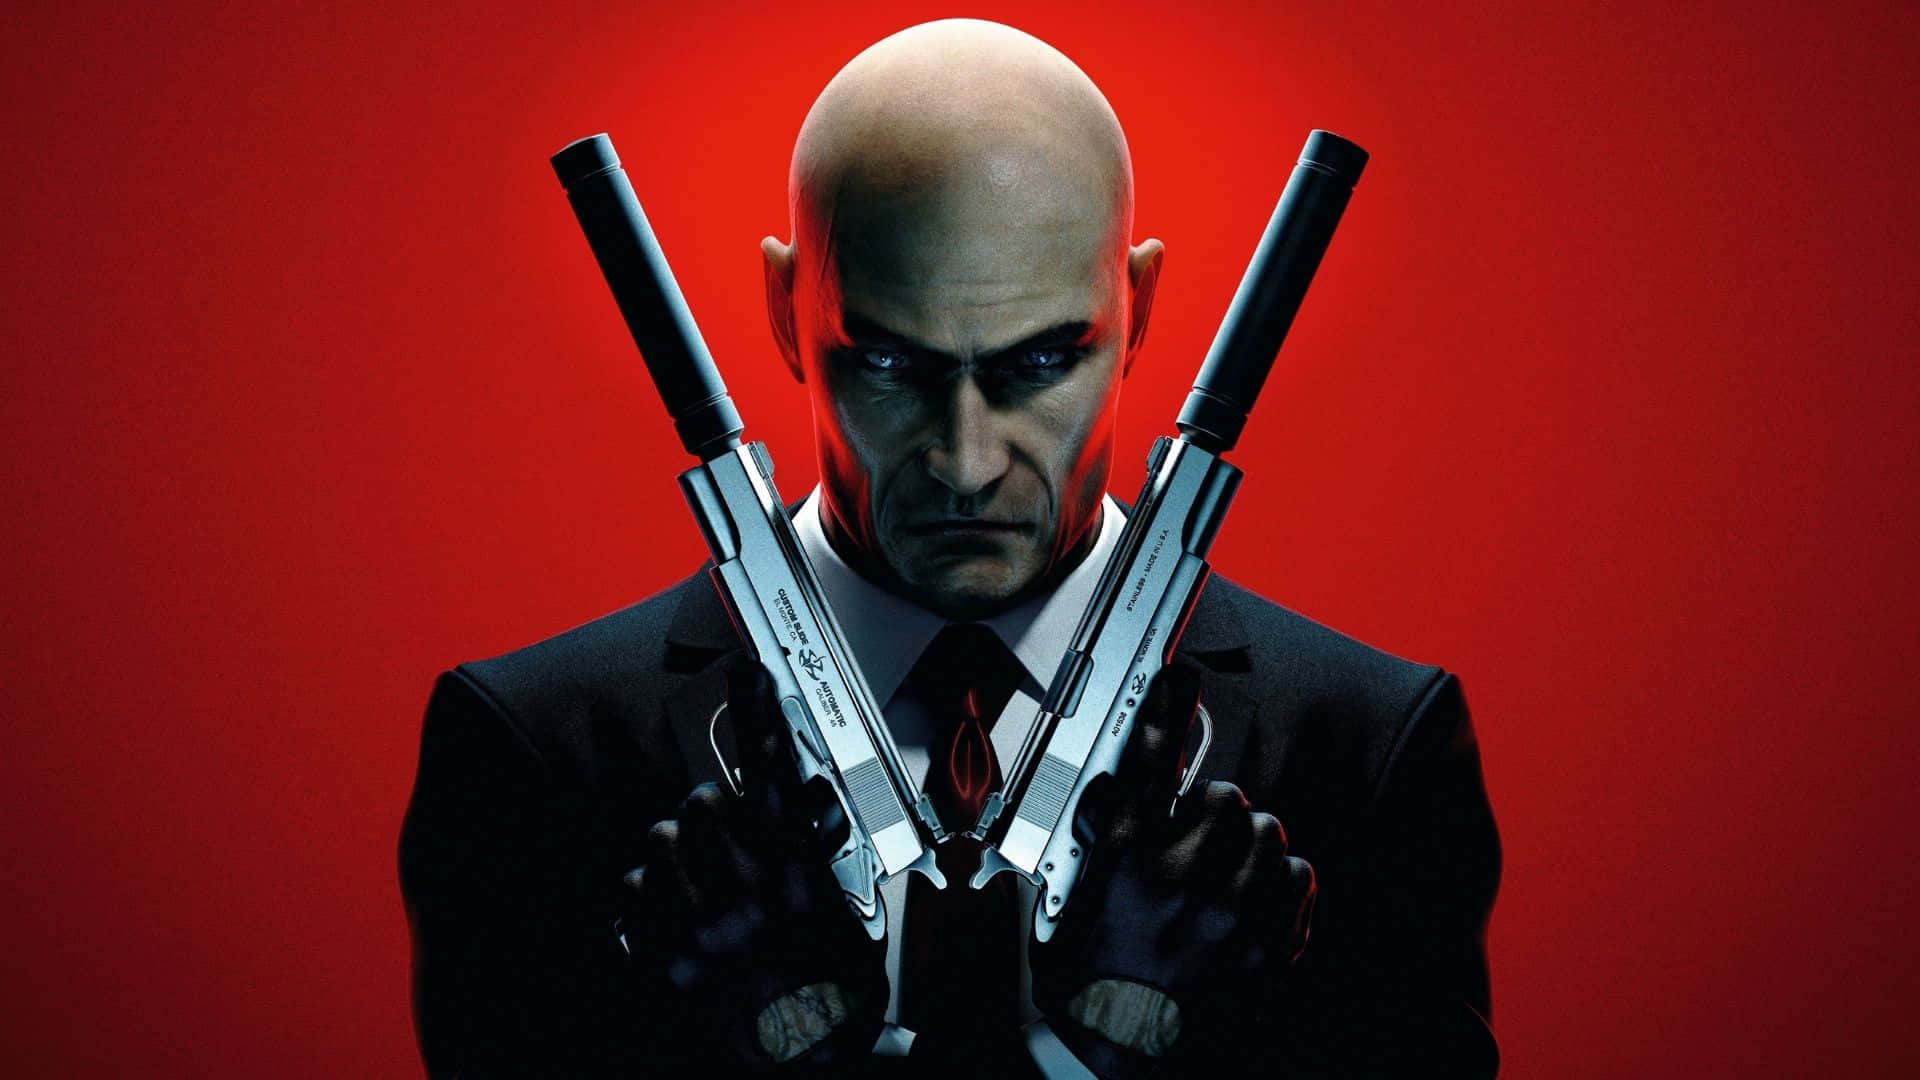 Agent 47 in the Hitman Absolution video game